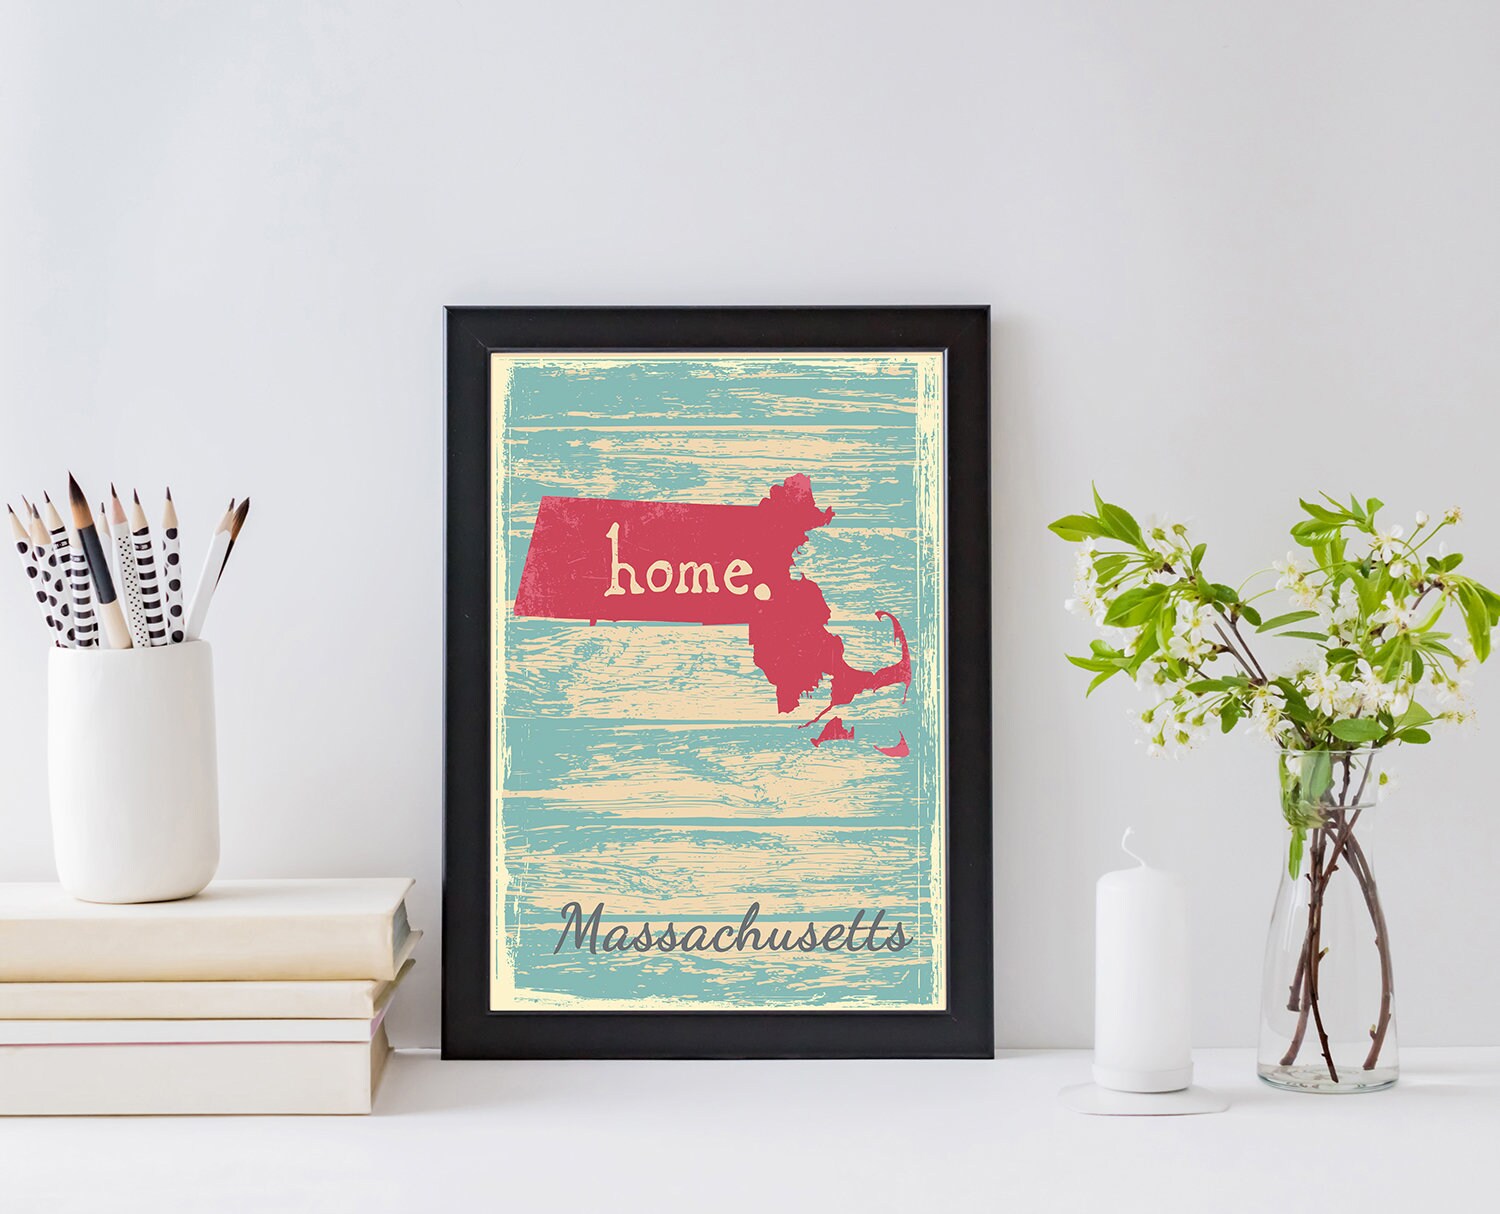 Retro Style Travel Poster, Massachusetts Vintage State Poster Printing, Home Wall Art, Office Wall  Decor, Poster Prints, Massachusetts Map